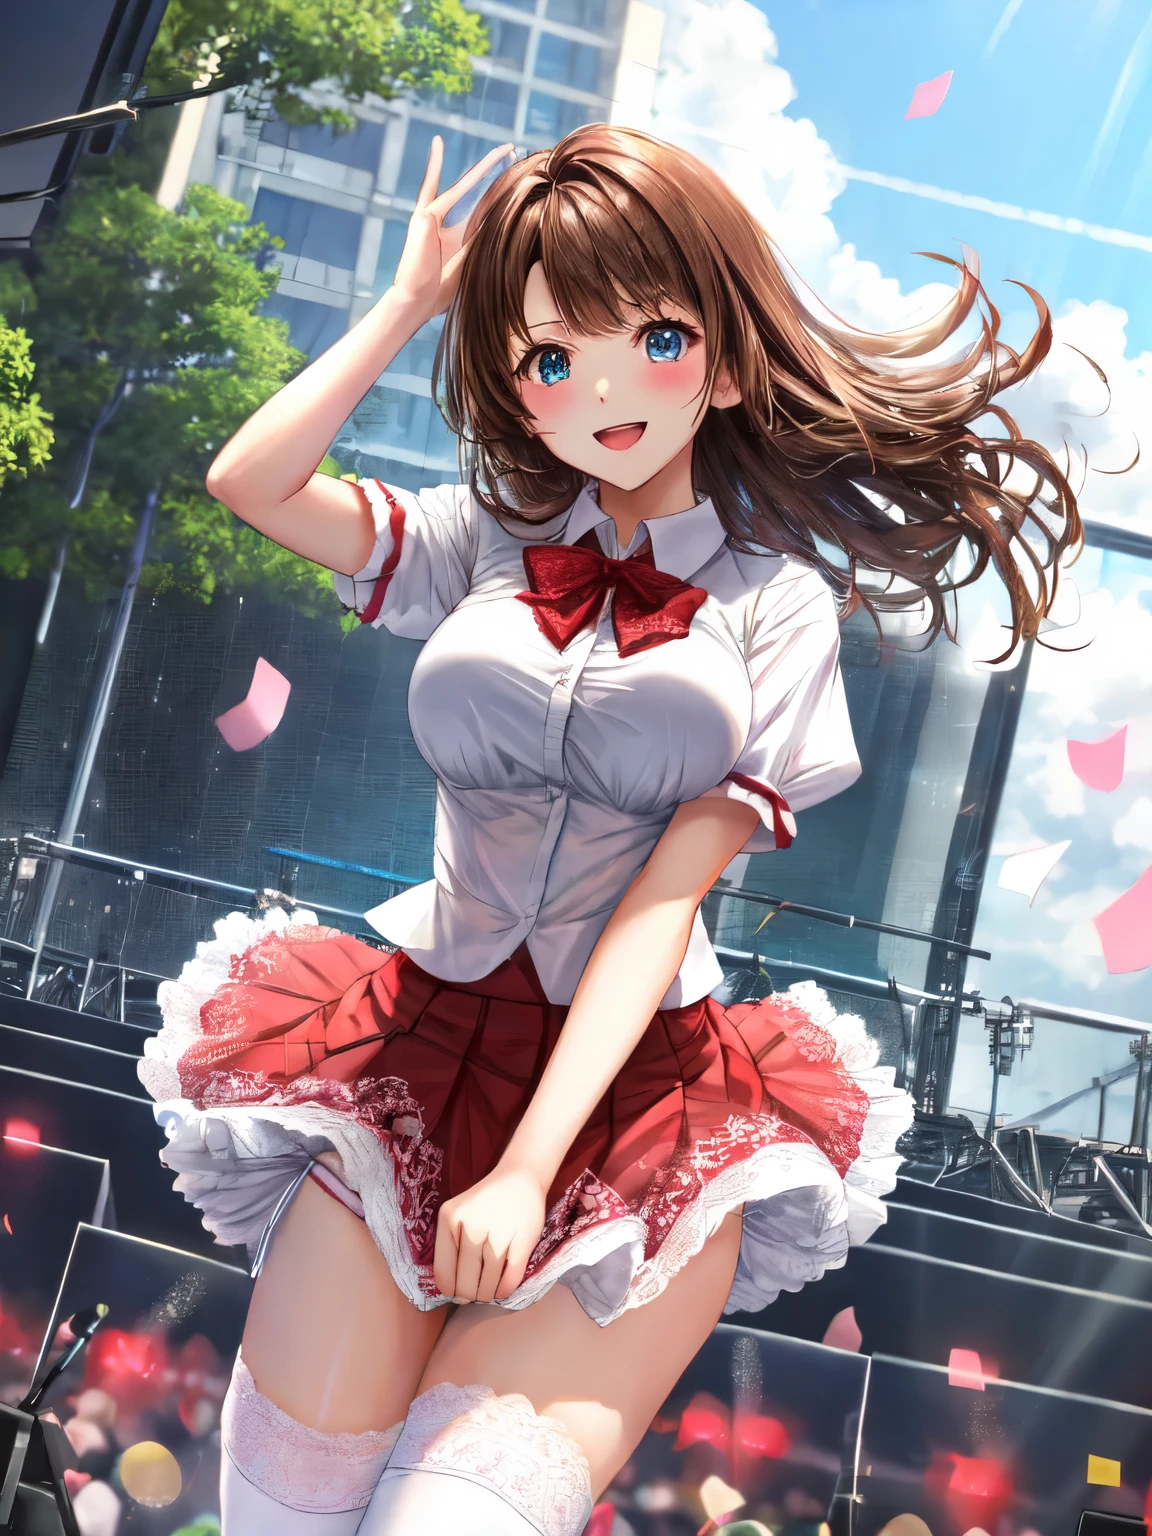 highest quality、All limbs、full finger、Slender beauty、brown hair、Dereste、red, White and red idol costume、knee socks、beautiful big breasts、live stage、sing、holding a microphone, dancing、big smile、(white horizontal lace panties:1.1), (skirt lift:0.97), (shirt lift:0.96), show off panties、(show off bra:0.94), embarrassed expression、 (The wind is blowing up my skirt:1.3), dynamic angle、Naughty Wind、(erect nipples:1)